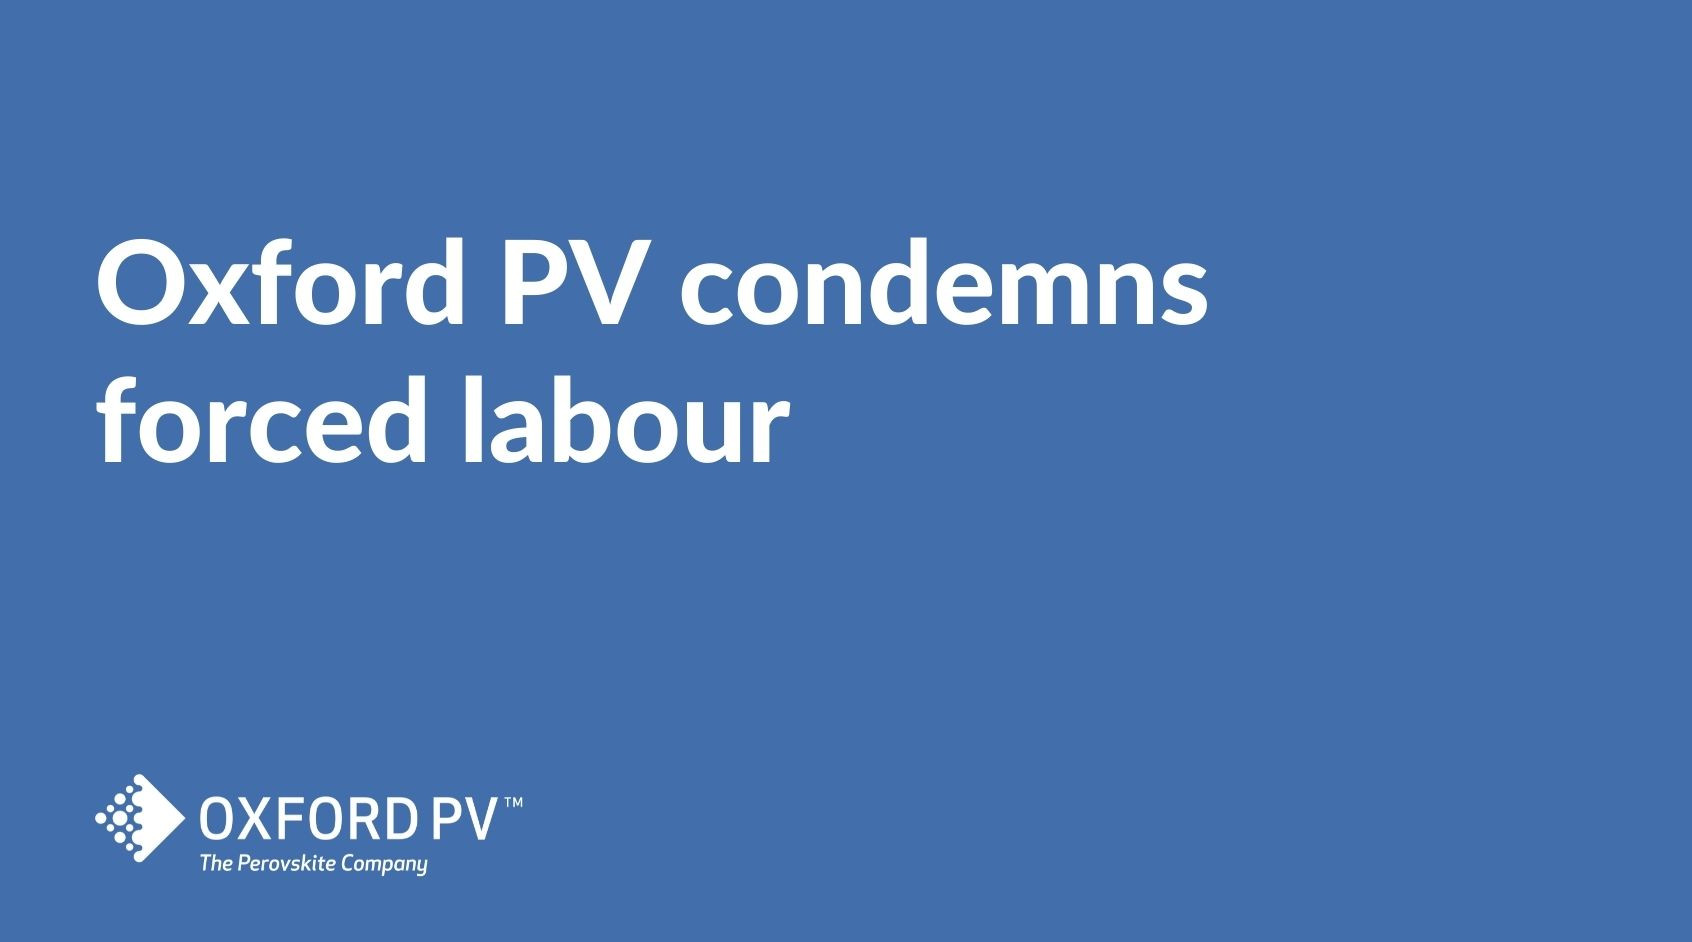 Oxford PV condemns forced labour